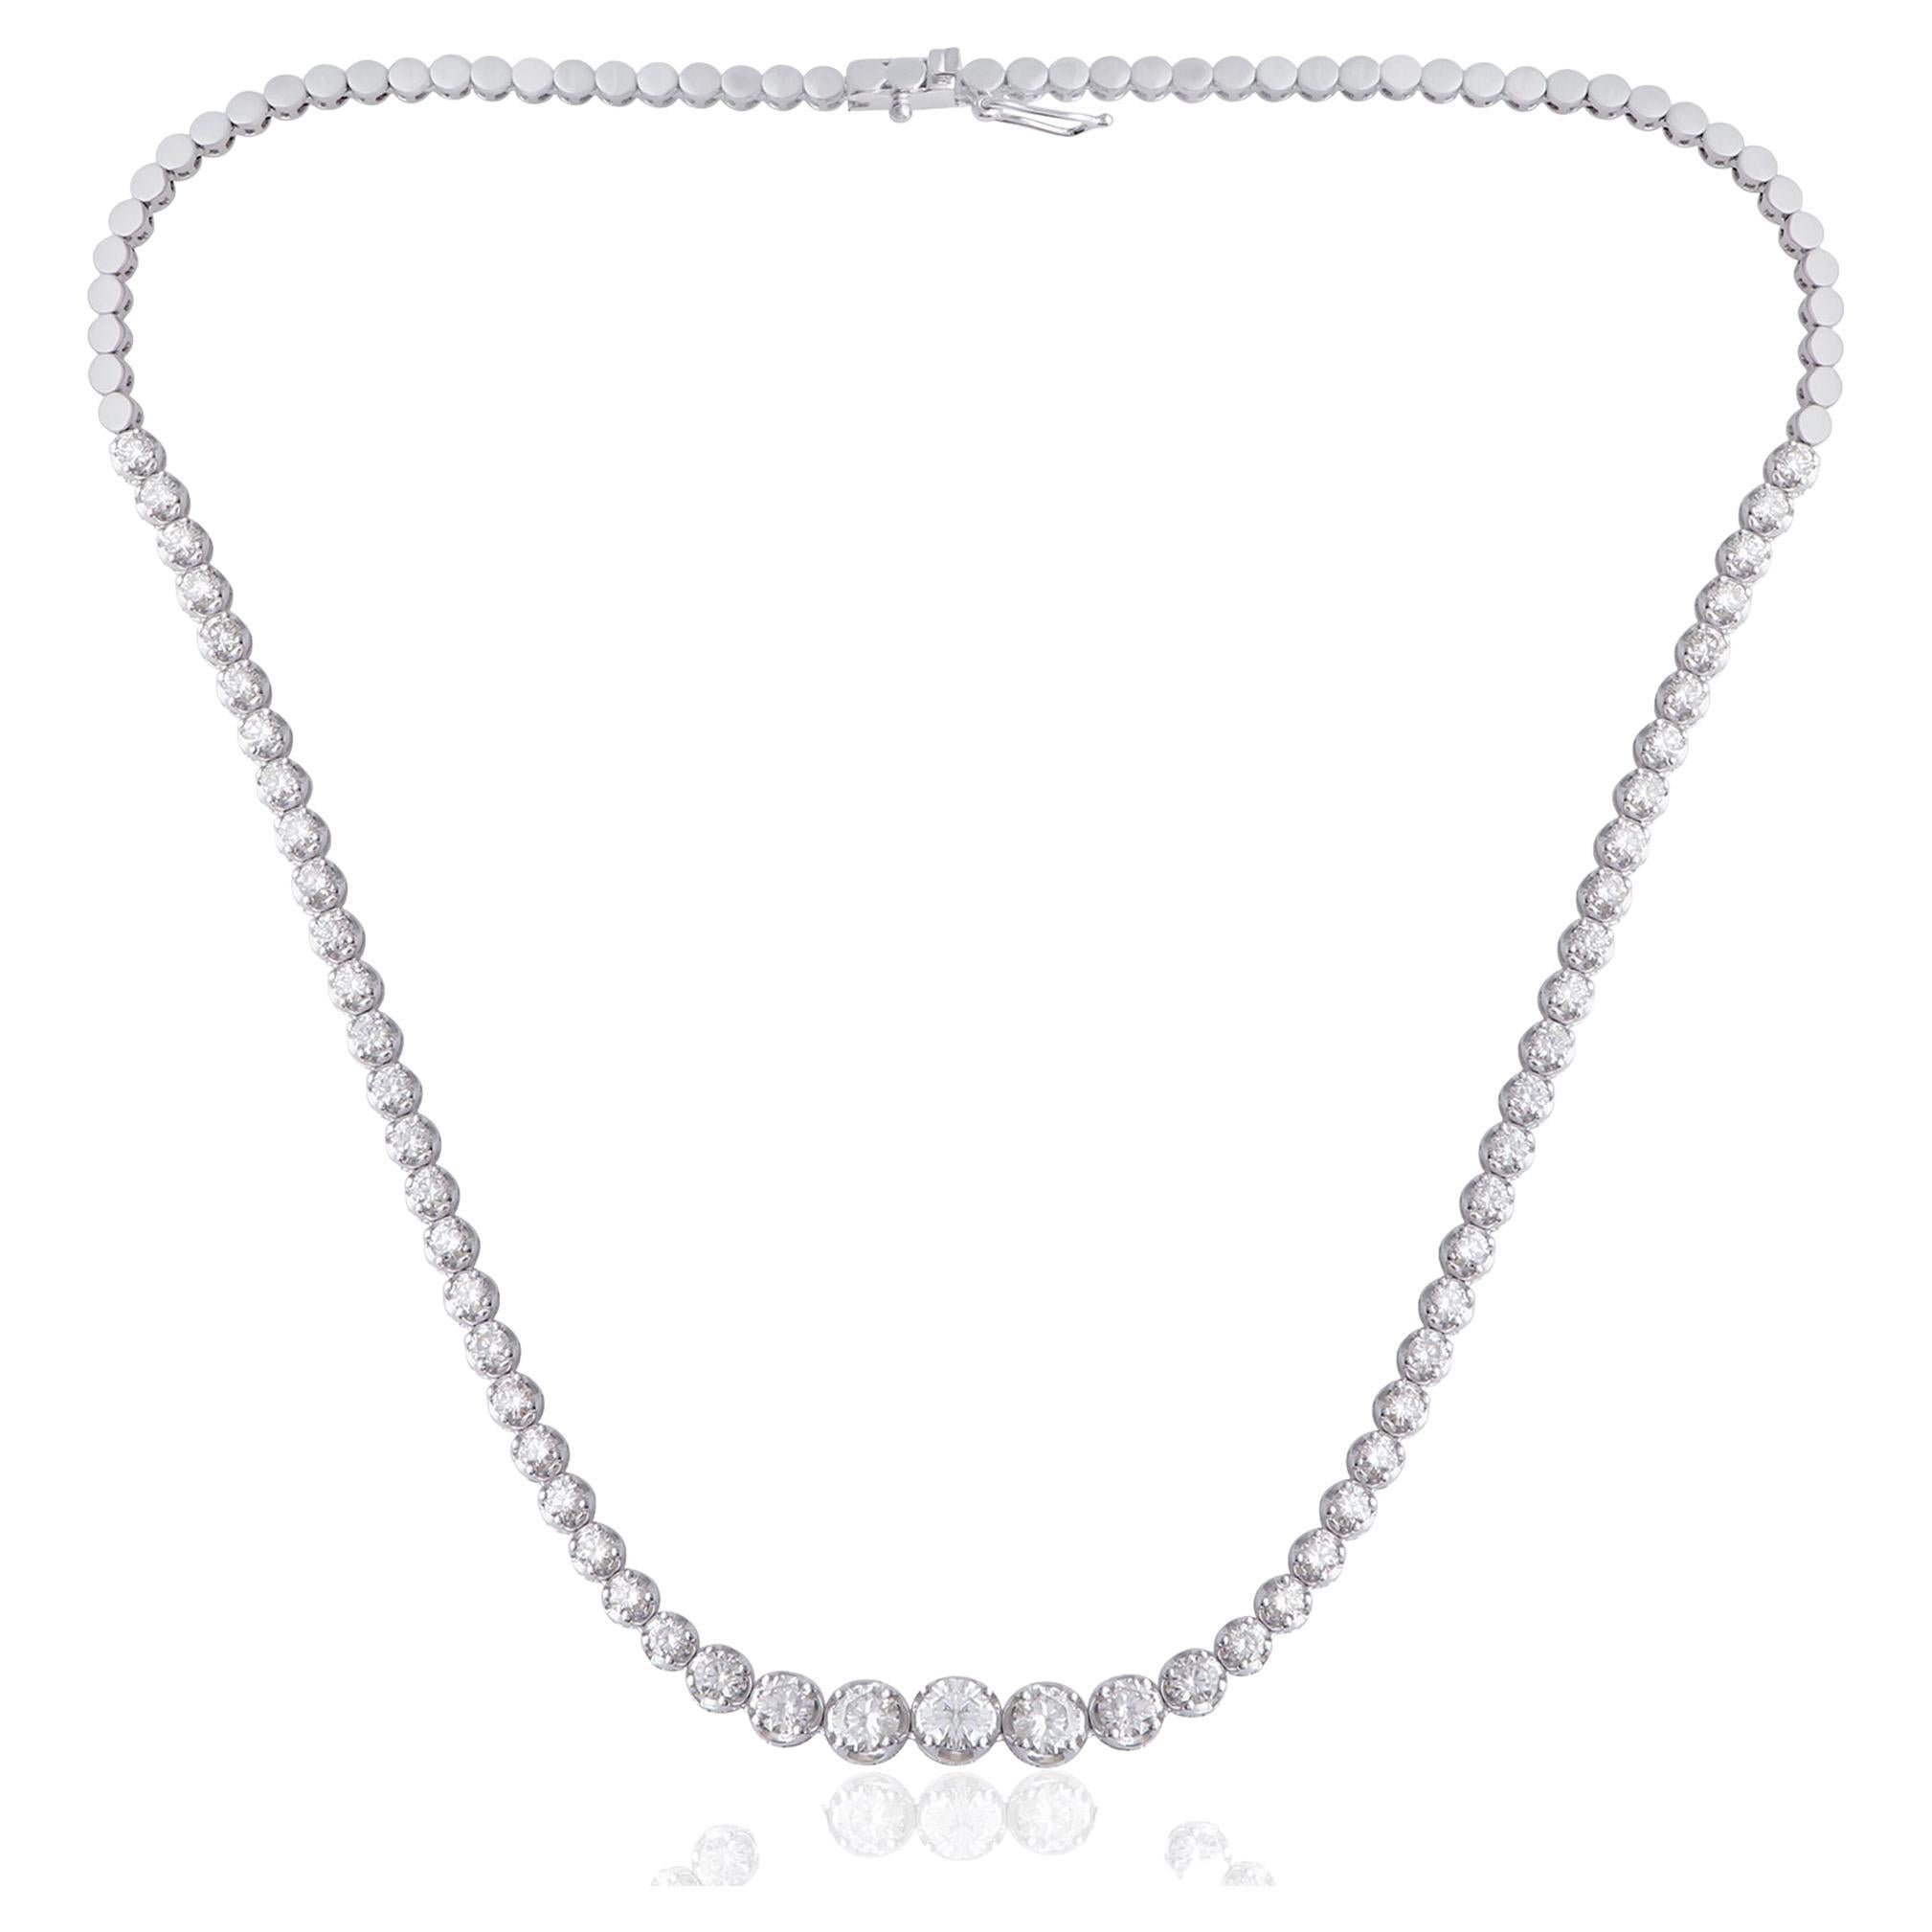 6.1 Carat SI Clarity HI Color Diamond Chain Necklace 18 Karat White Gold Jewelry For Sale